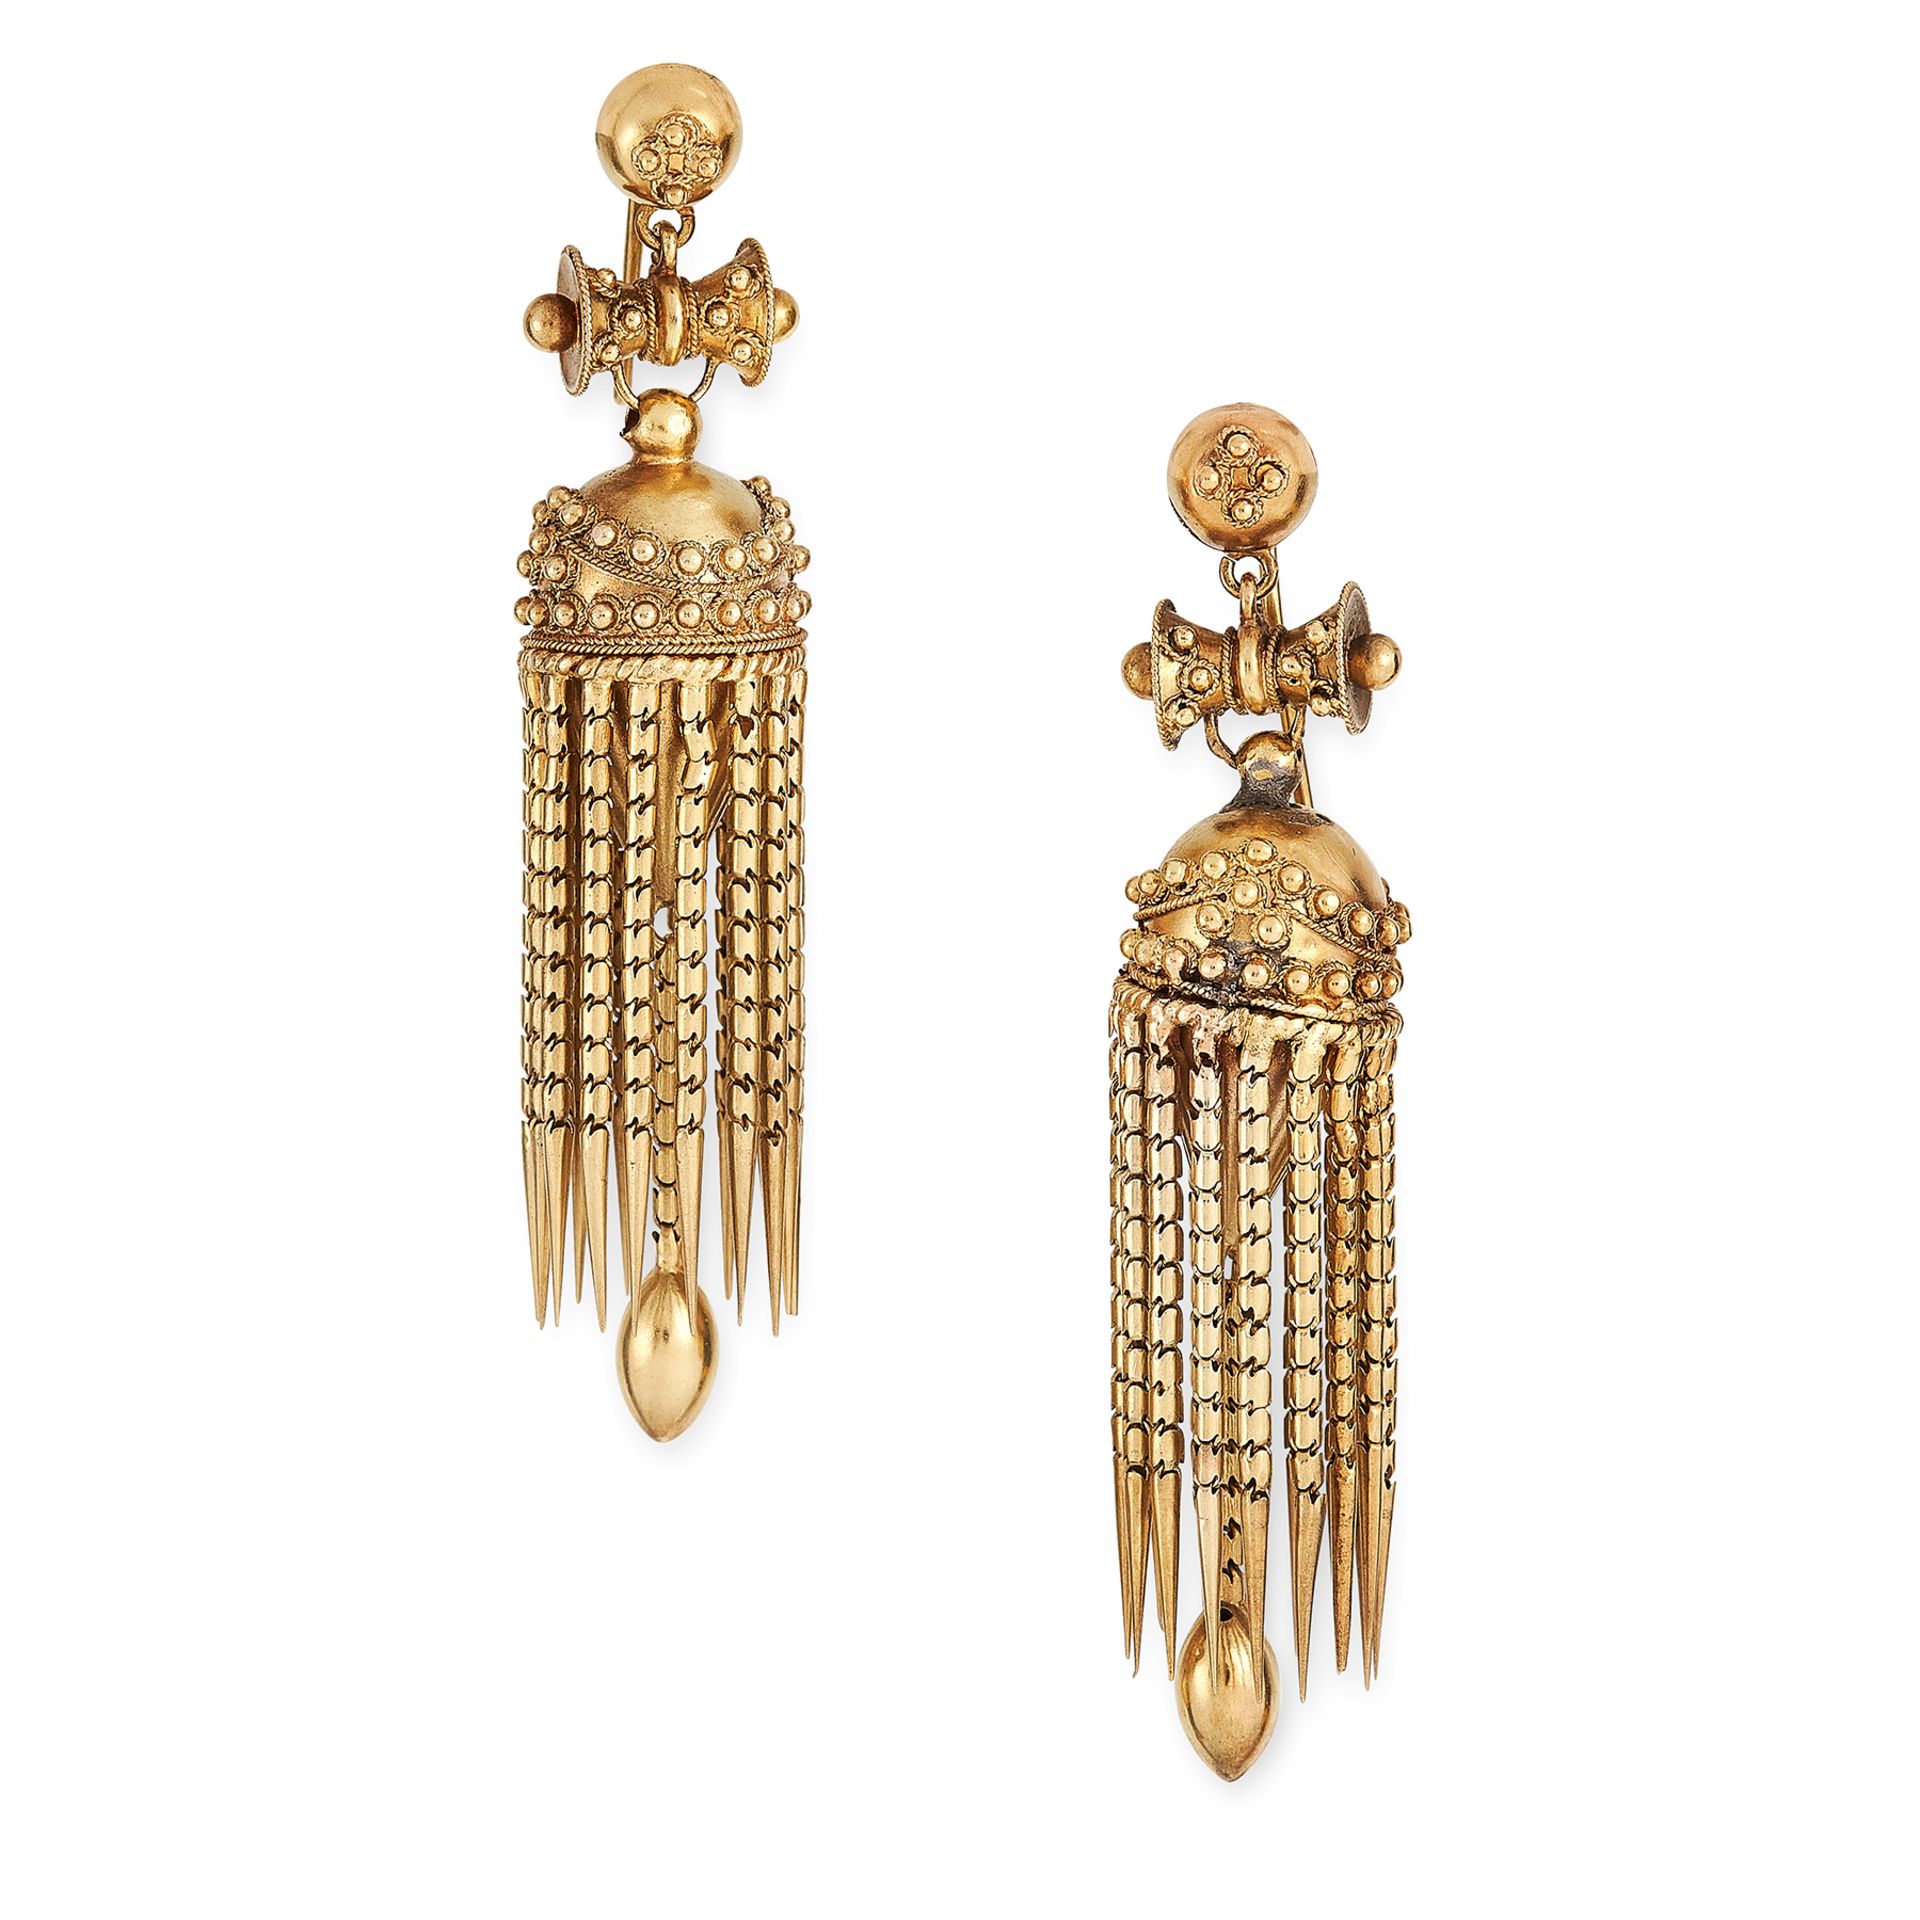 A PAIR OF ANTIQUE GOLD TASSEL EARRINGS, 19TH CENTURY in high carat yellow gold, in the Etruscan